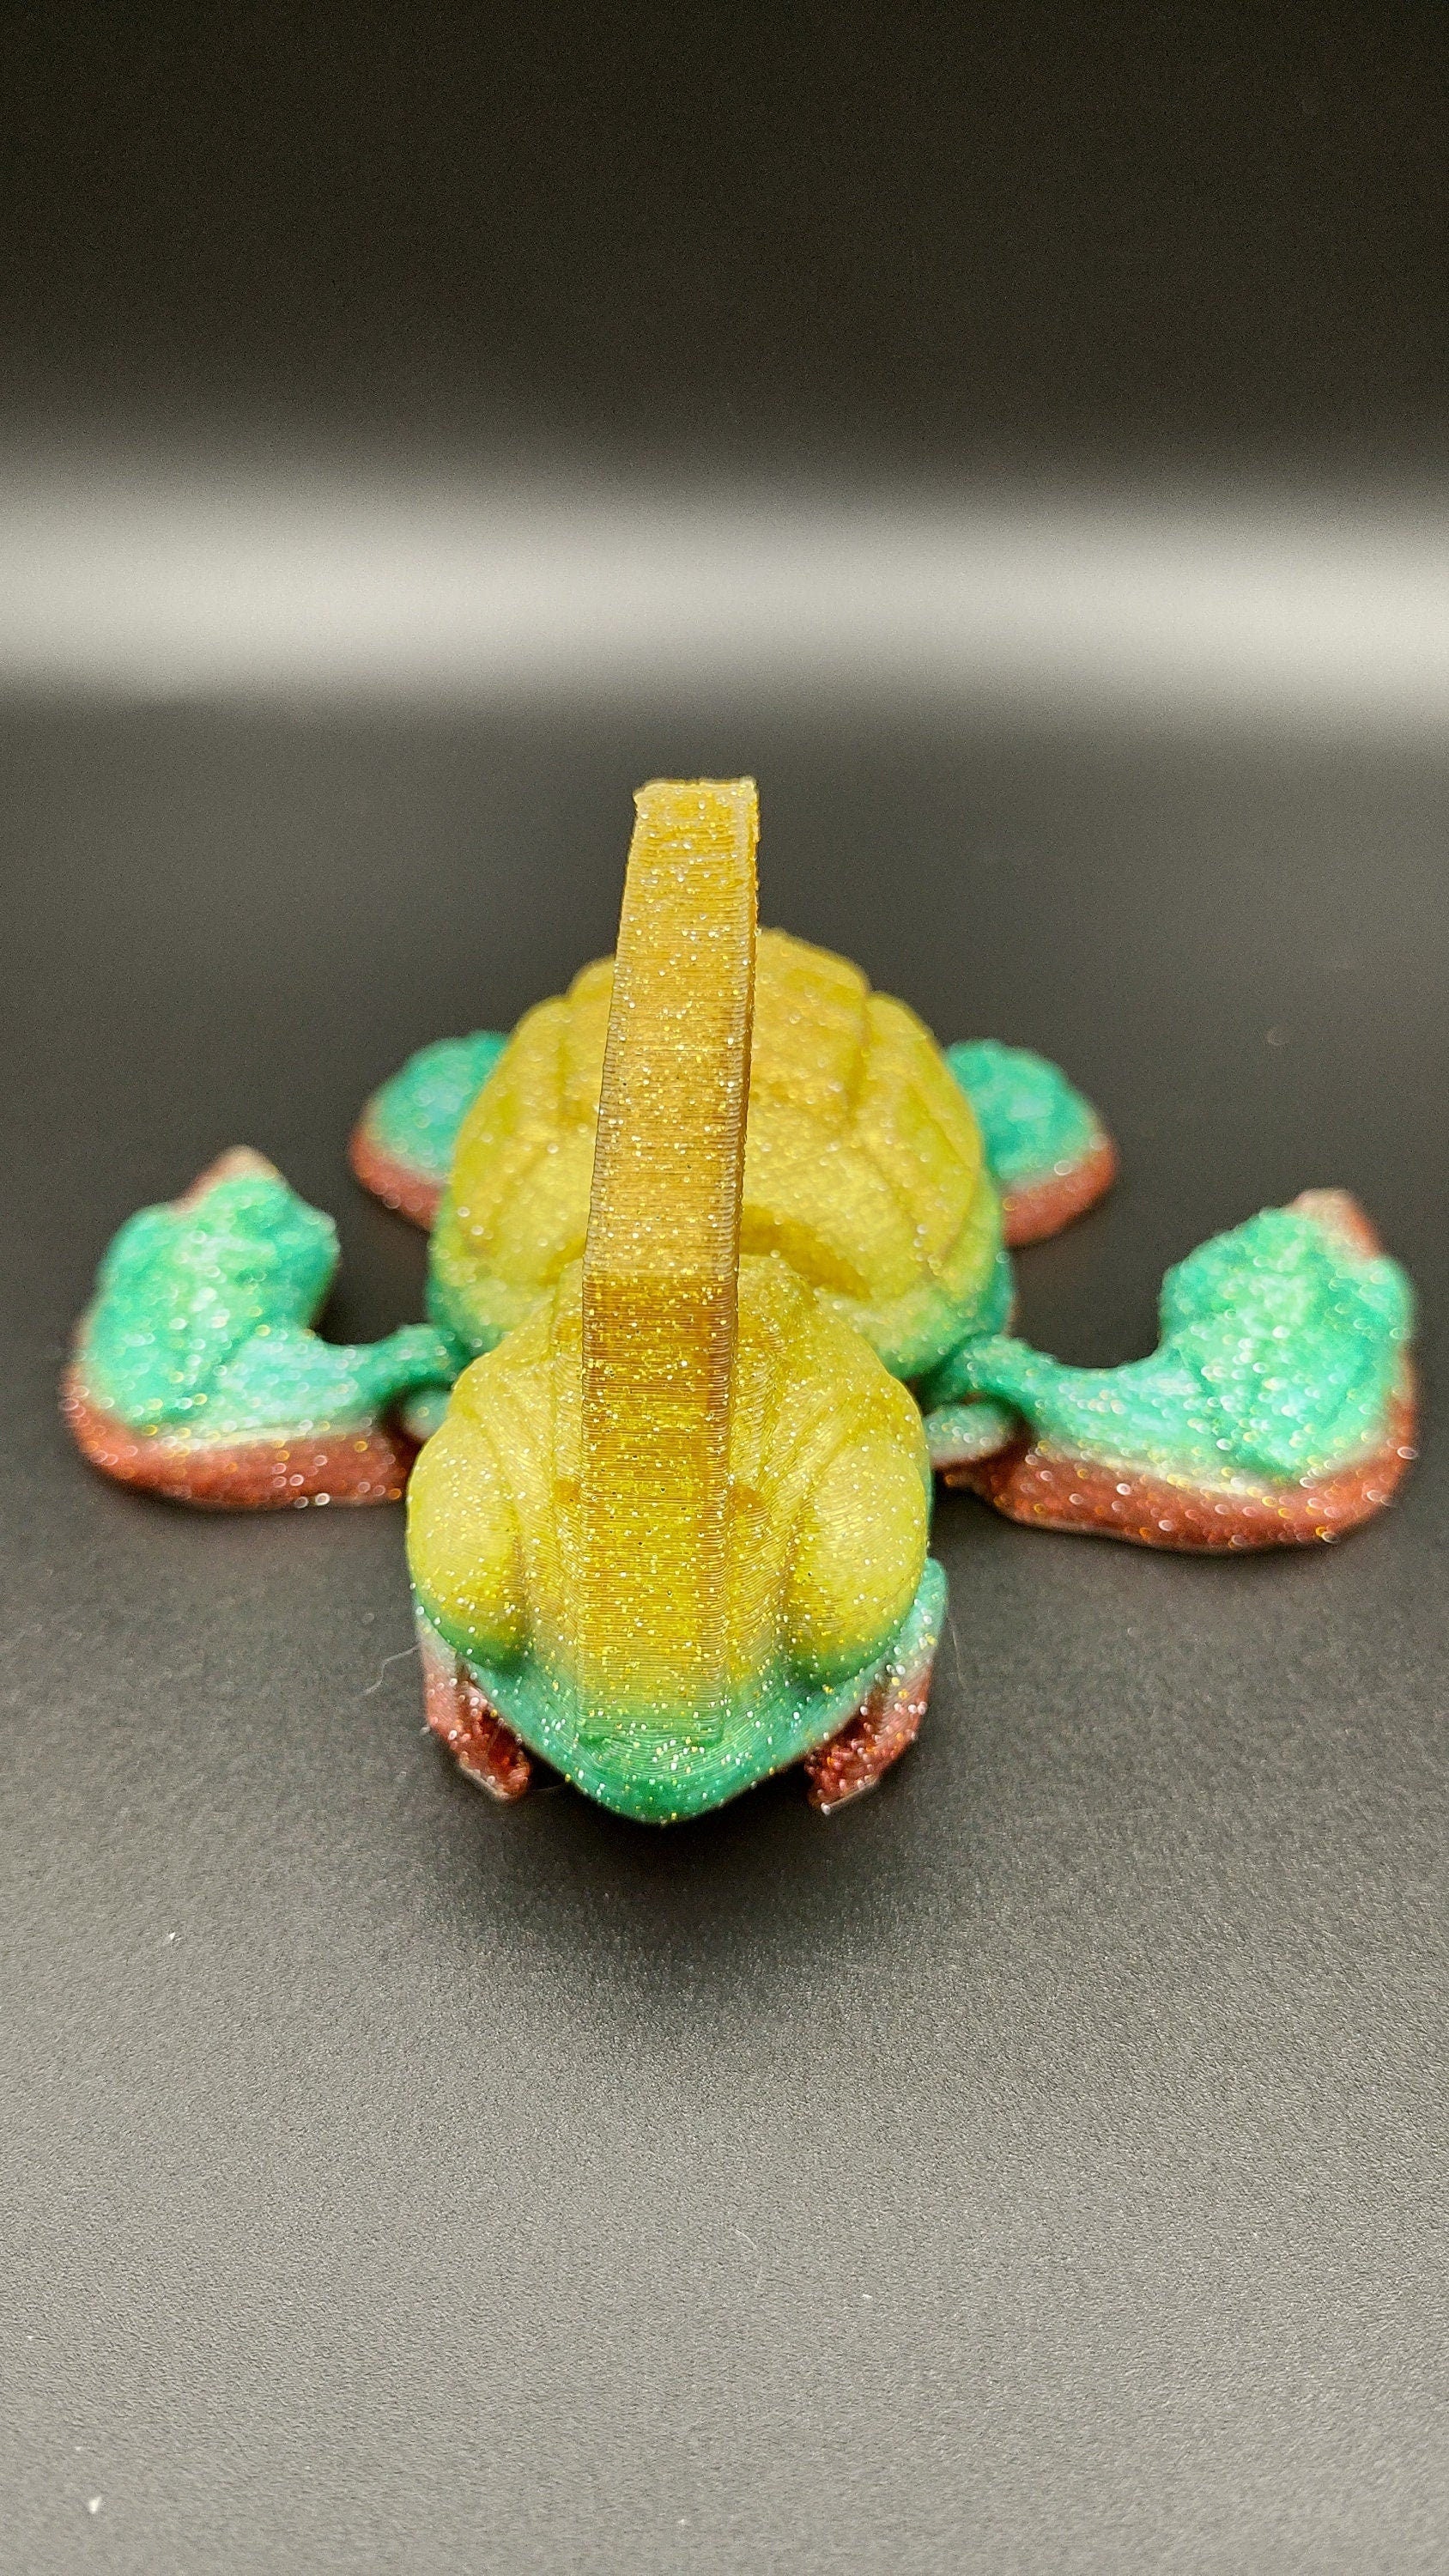 Sparkle Rainbow, (Red, Green, Yellow Gold,) Grenurtle, grenade / turtle 3d printed (made) adult desk fidget toy. Sensory turtle buddy.